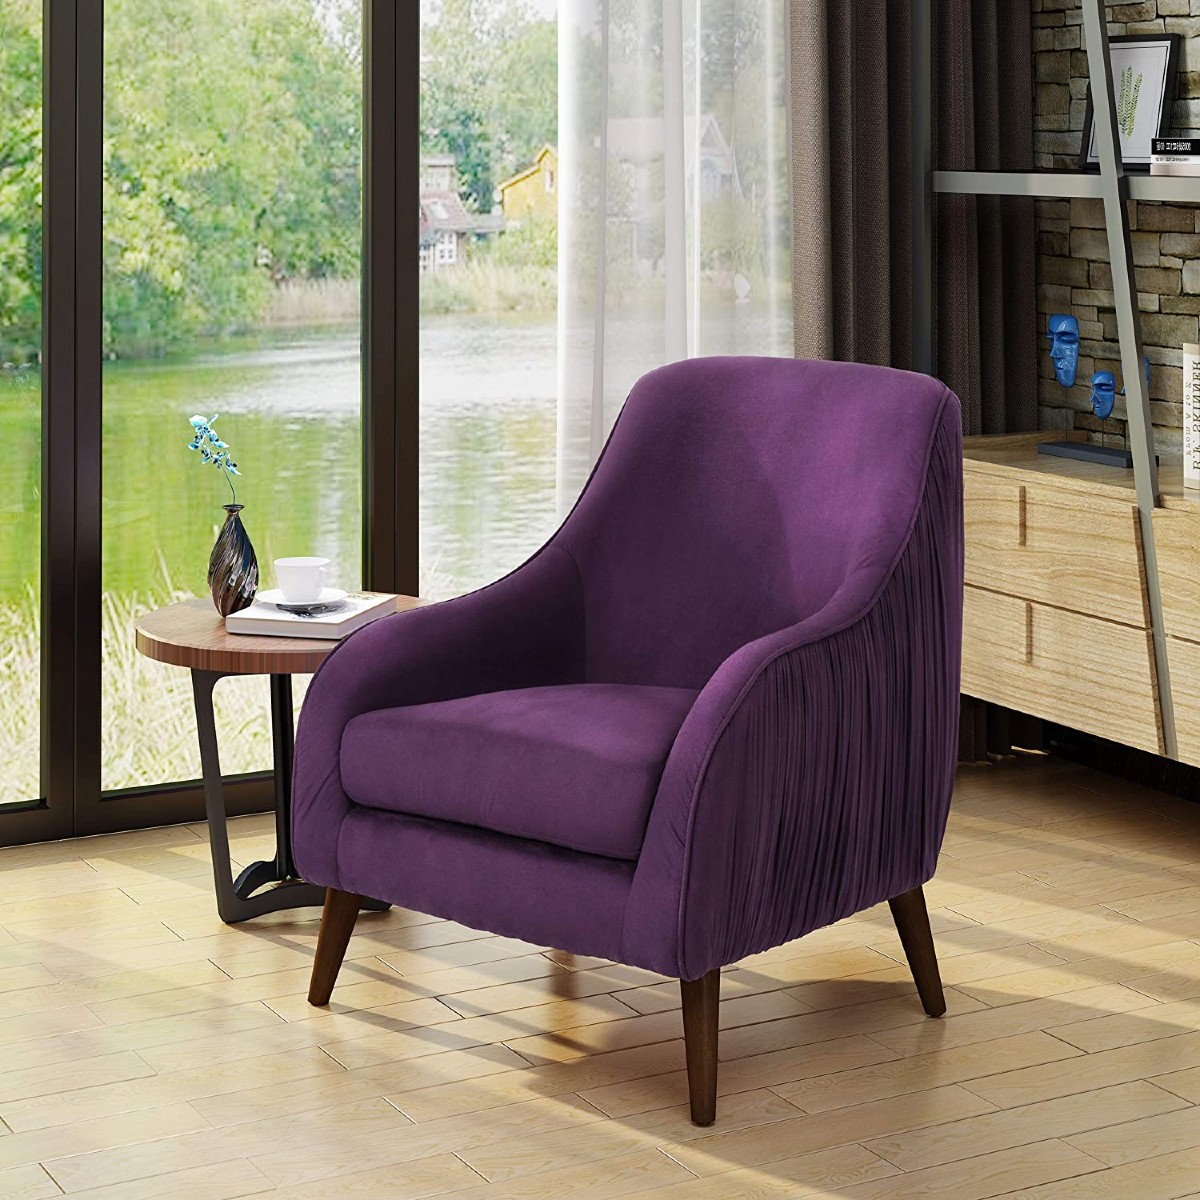 purple velvet chair with wooden furniture